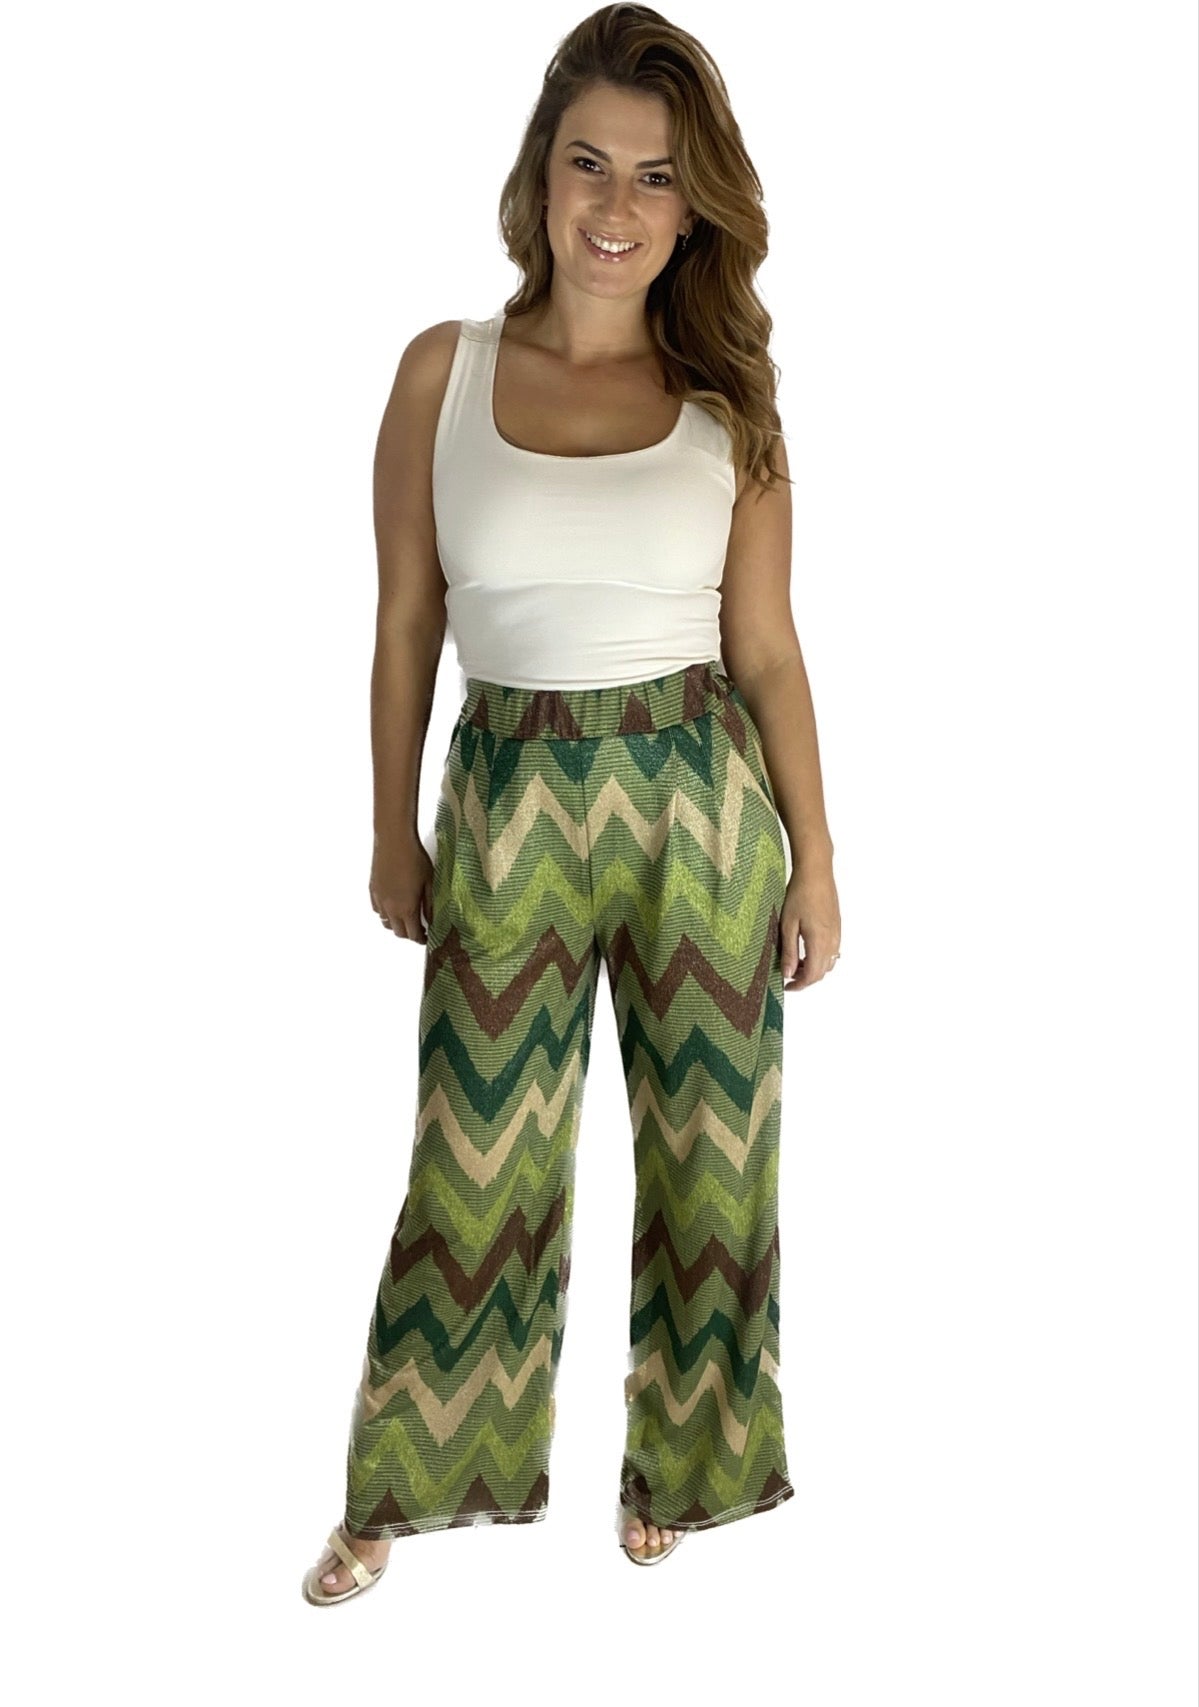 zig zag green gold brown trousers elasticated waistband casual trousers pants women